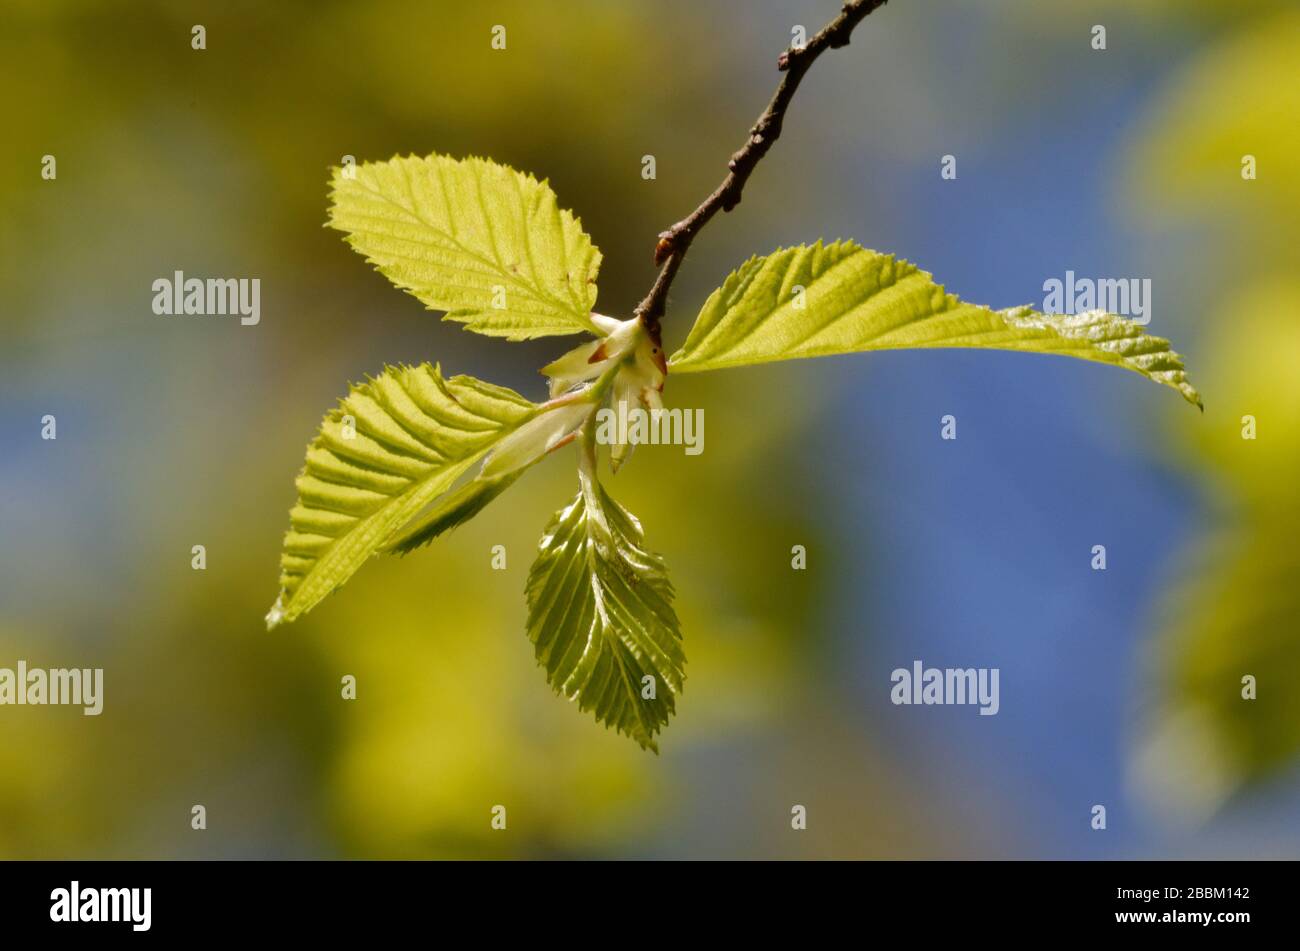 carpinus betulus, young leaves of a common hornbeam against a blurred green-blue background in spring Stock Photo